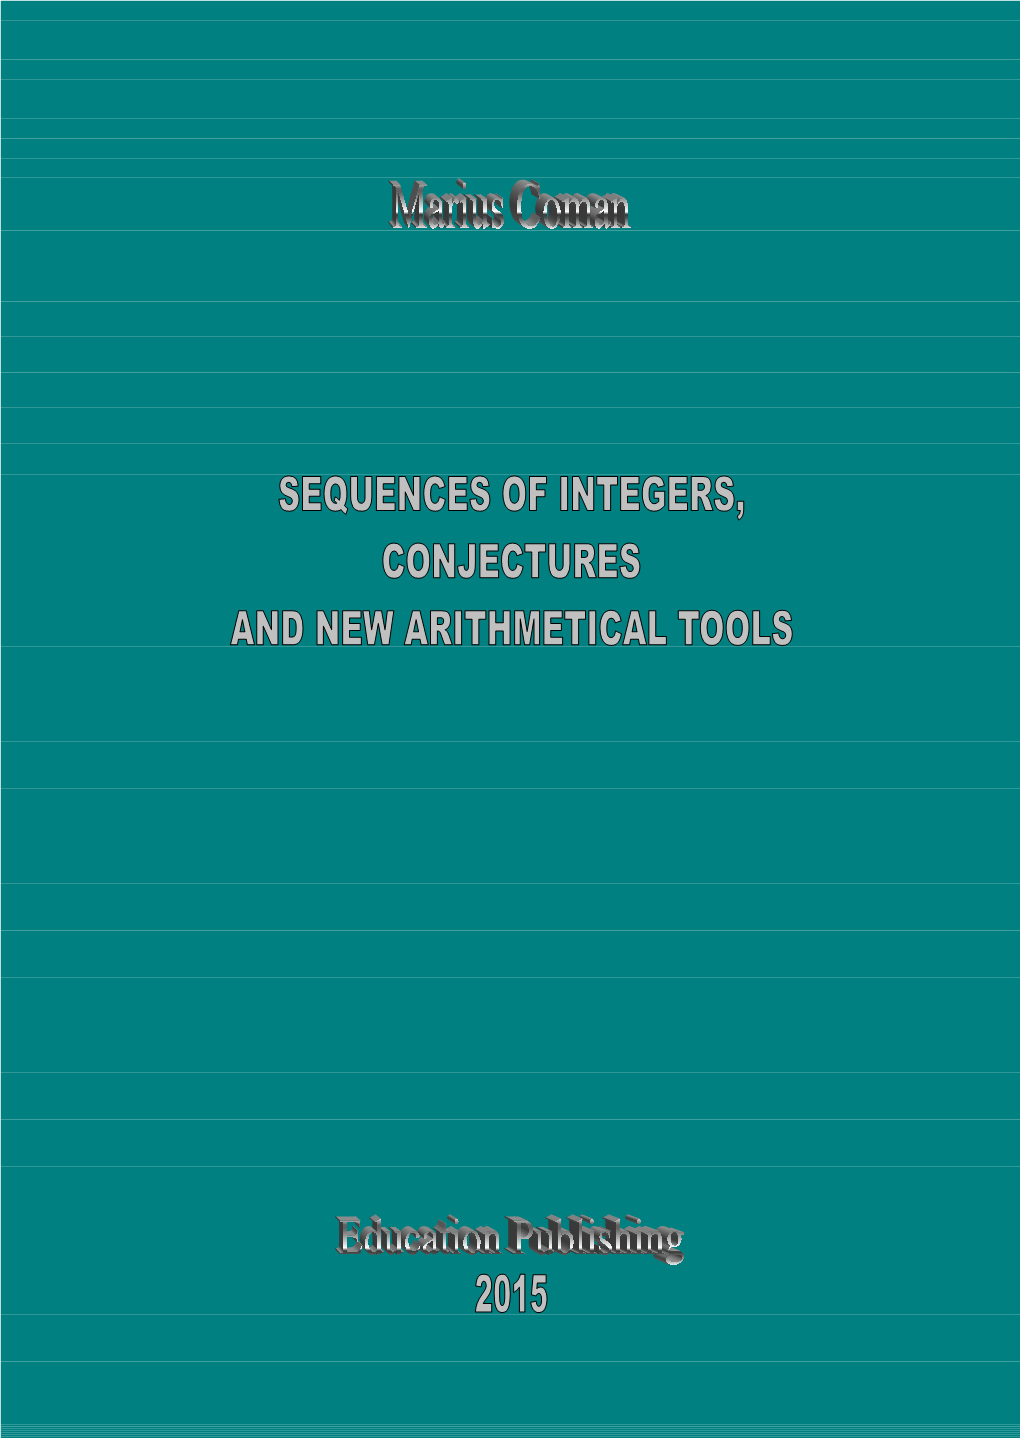 Sequences of Integers, Conjectures and New Arithmetical Tools